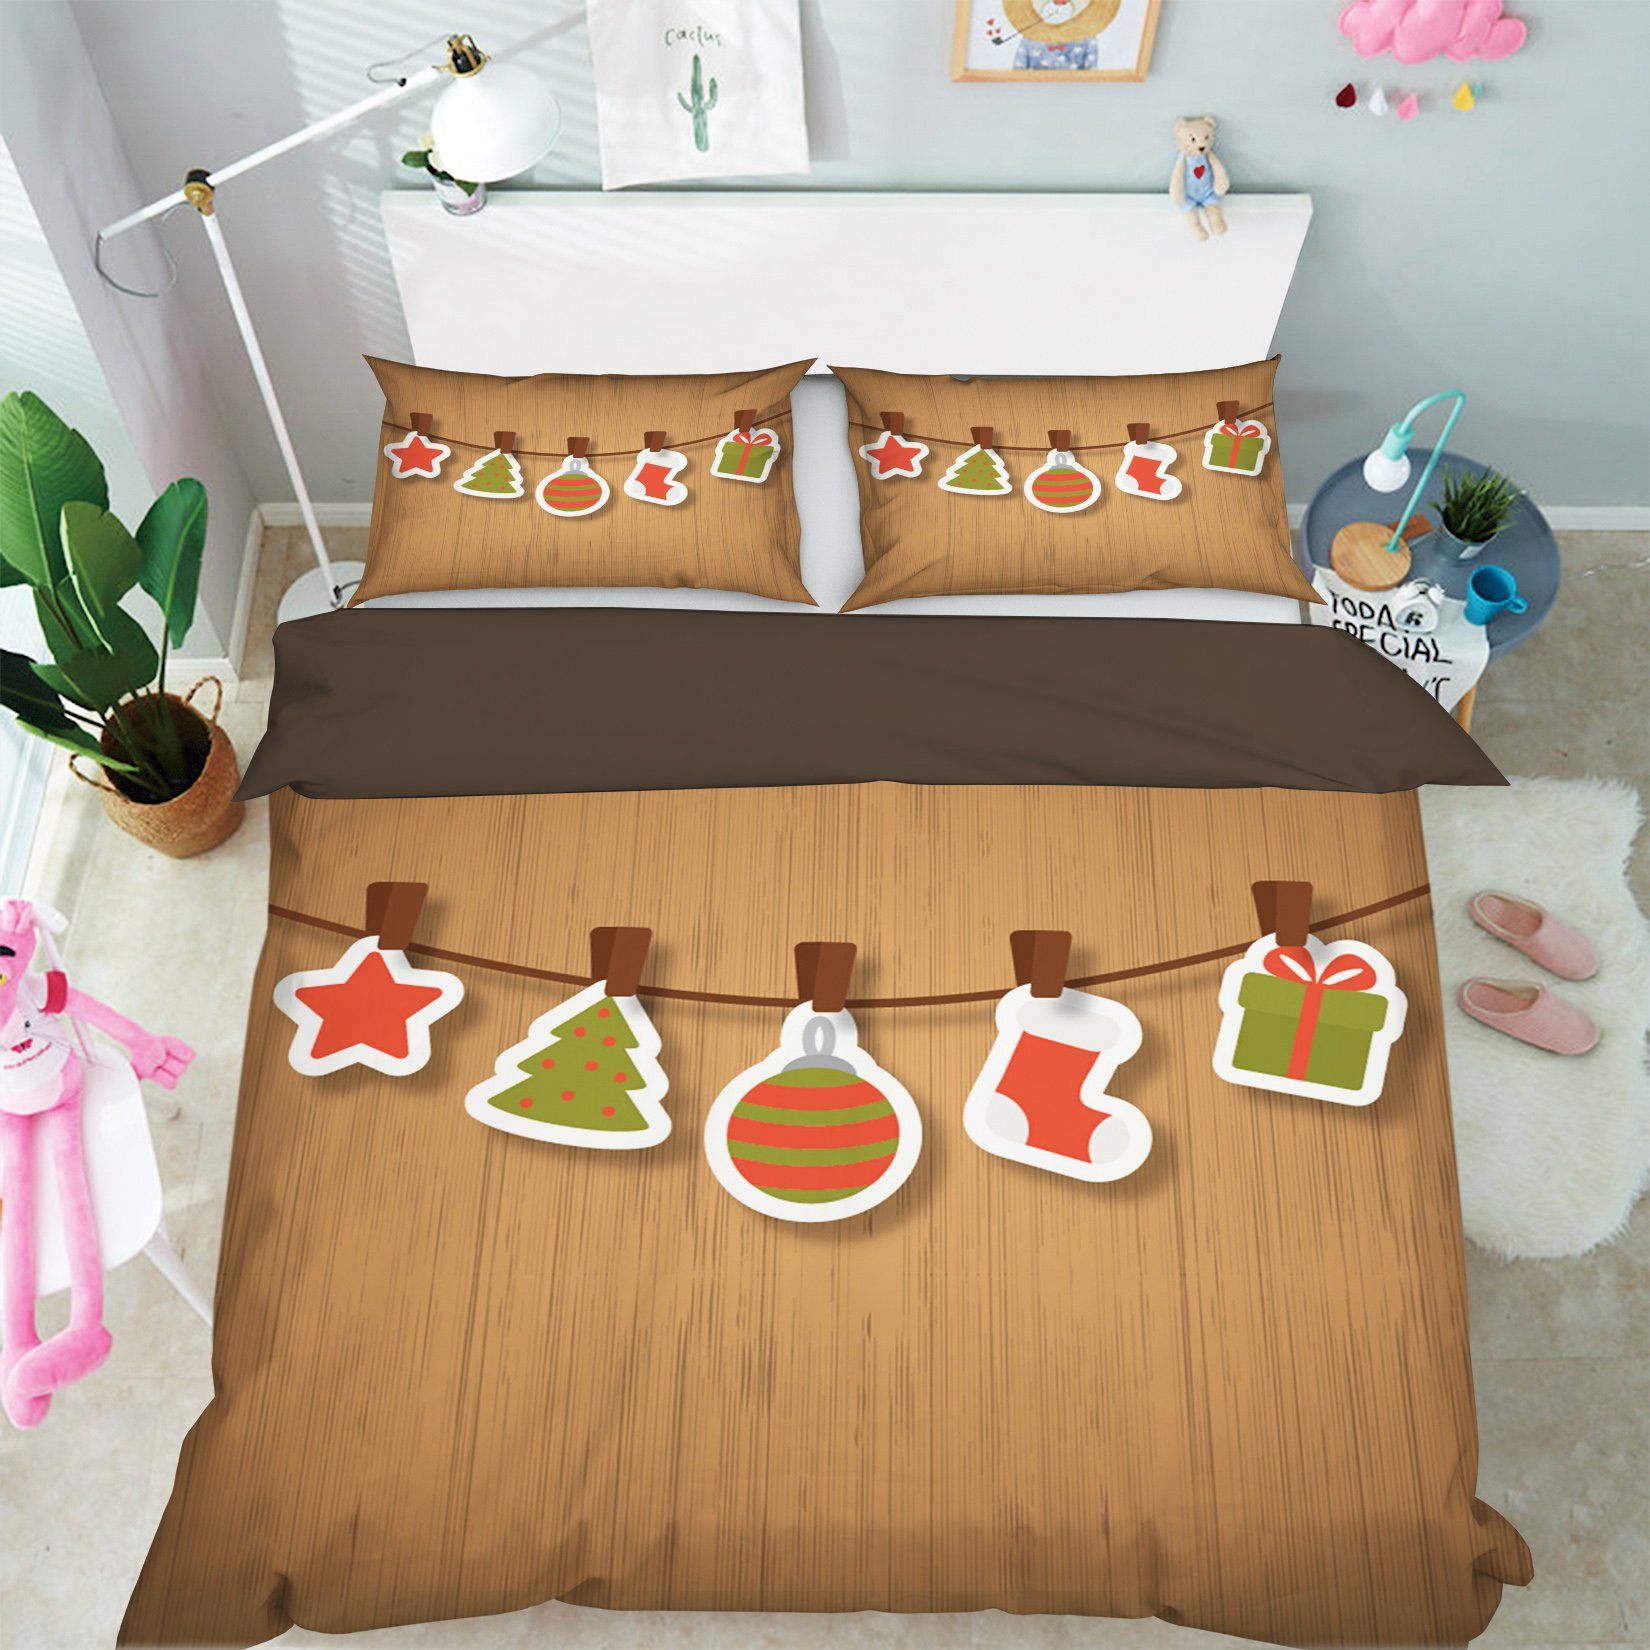 3D Christmas Brand Pendant 15 Bed Pillowcases Quilt Quiet Covers AJ Creativity Home 